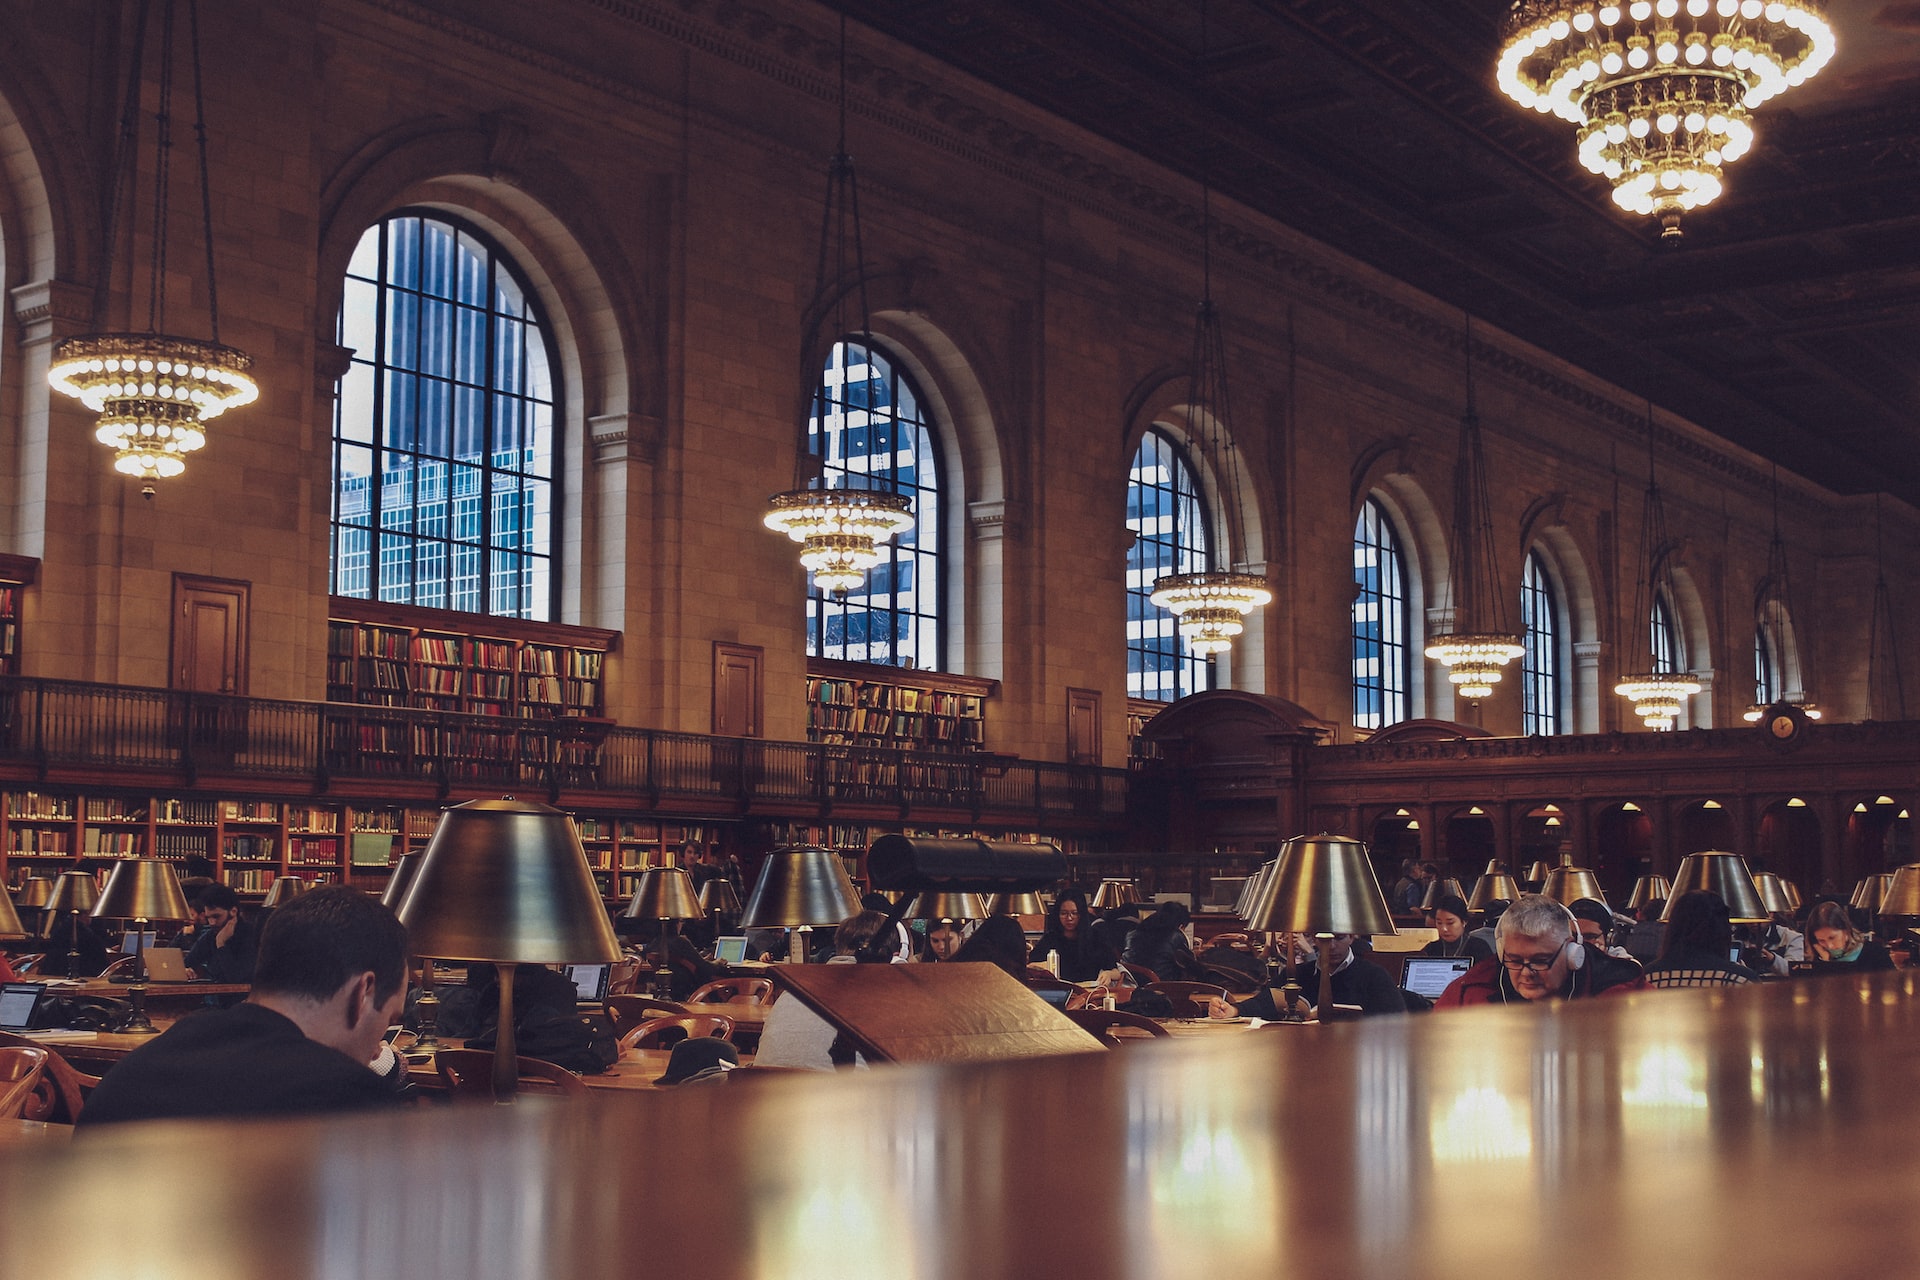 The New York Central Library